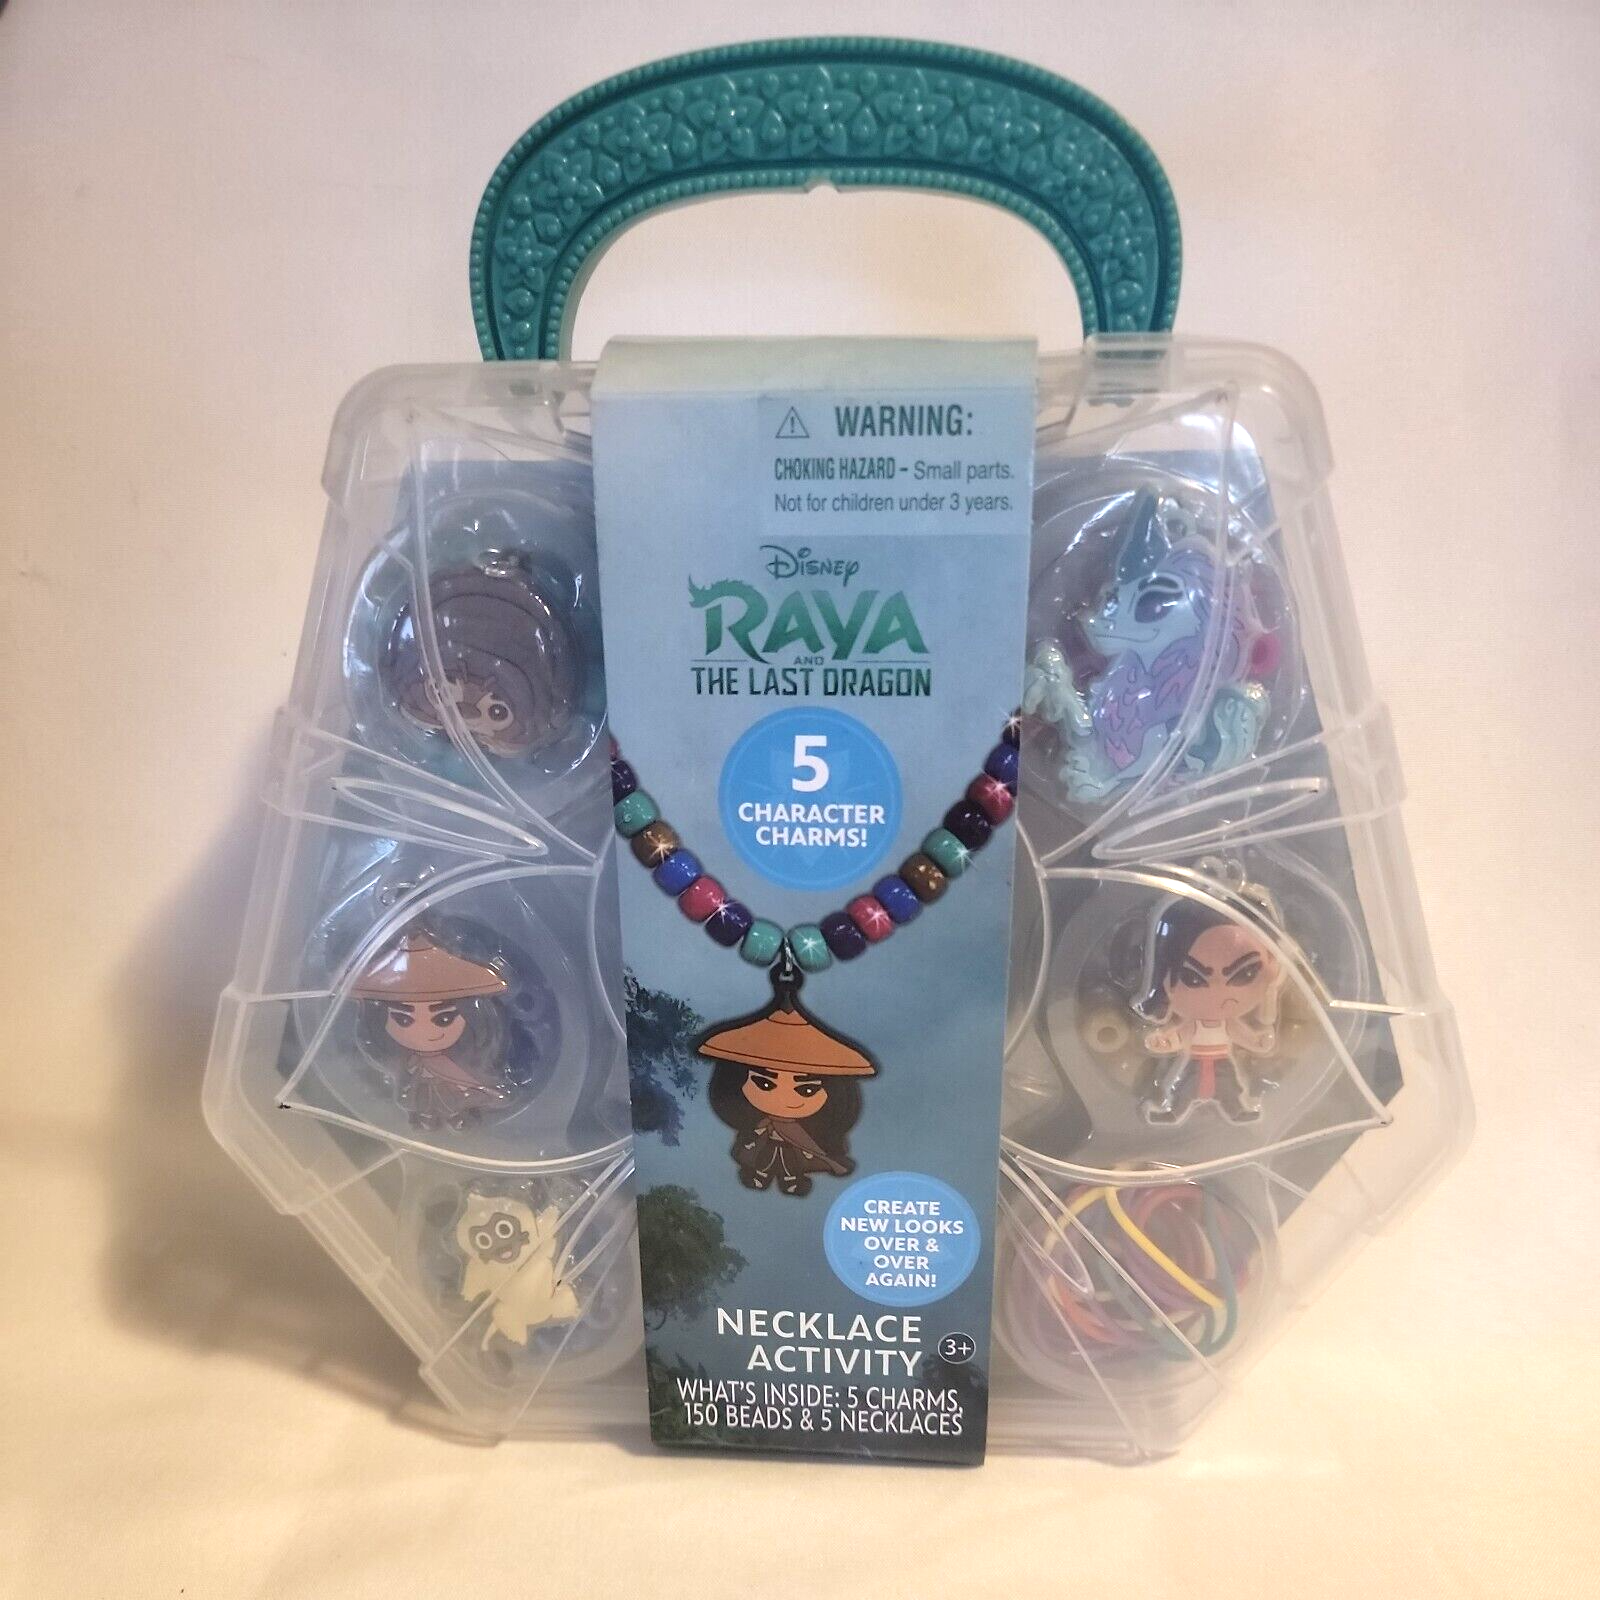 Primary image for Disney Raya and the Last Dragon Necklace Activity 5 Charms, 150 beads, 5 Necklac